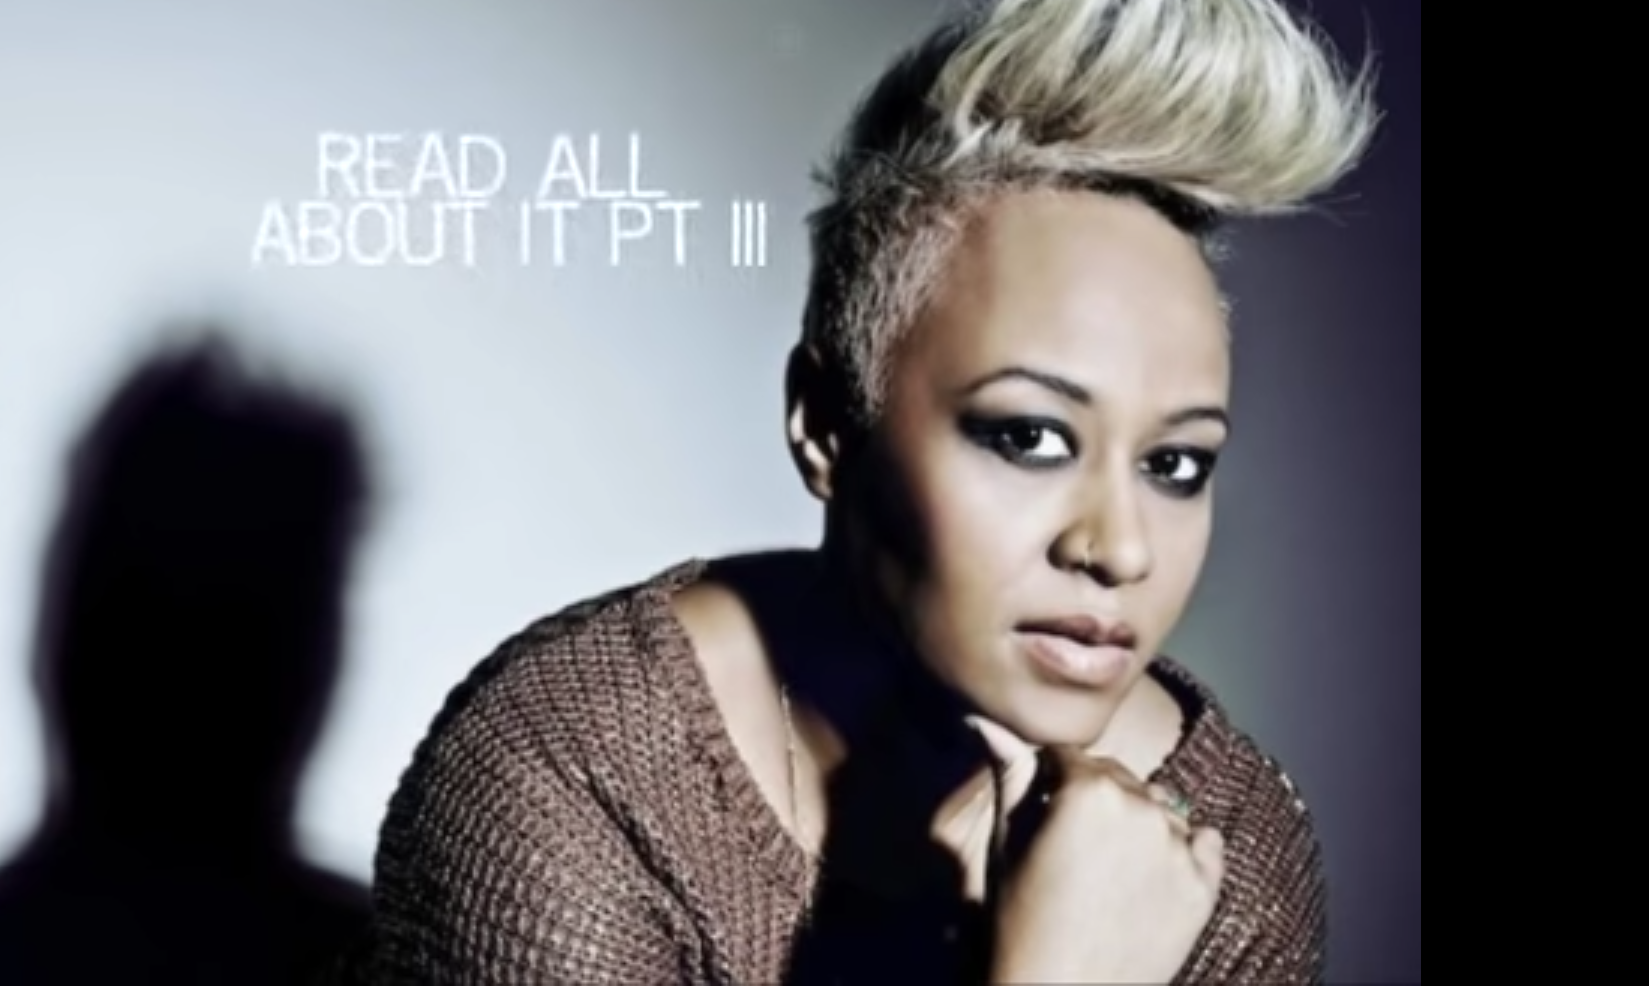 emeli sande read all about it part 3 mp3 download